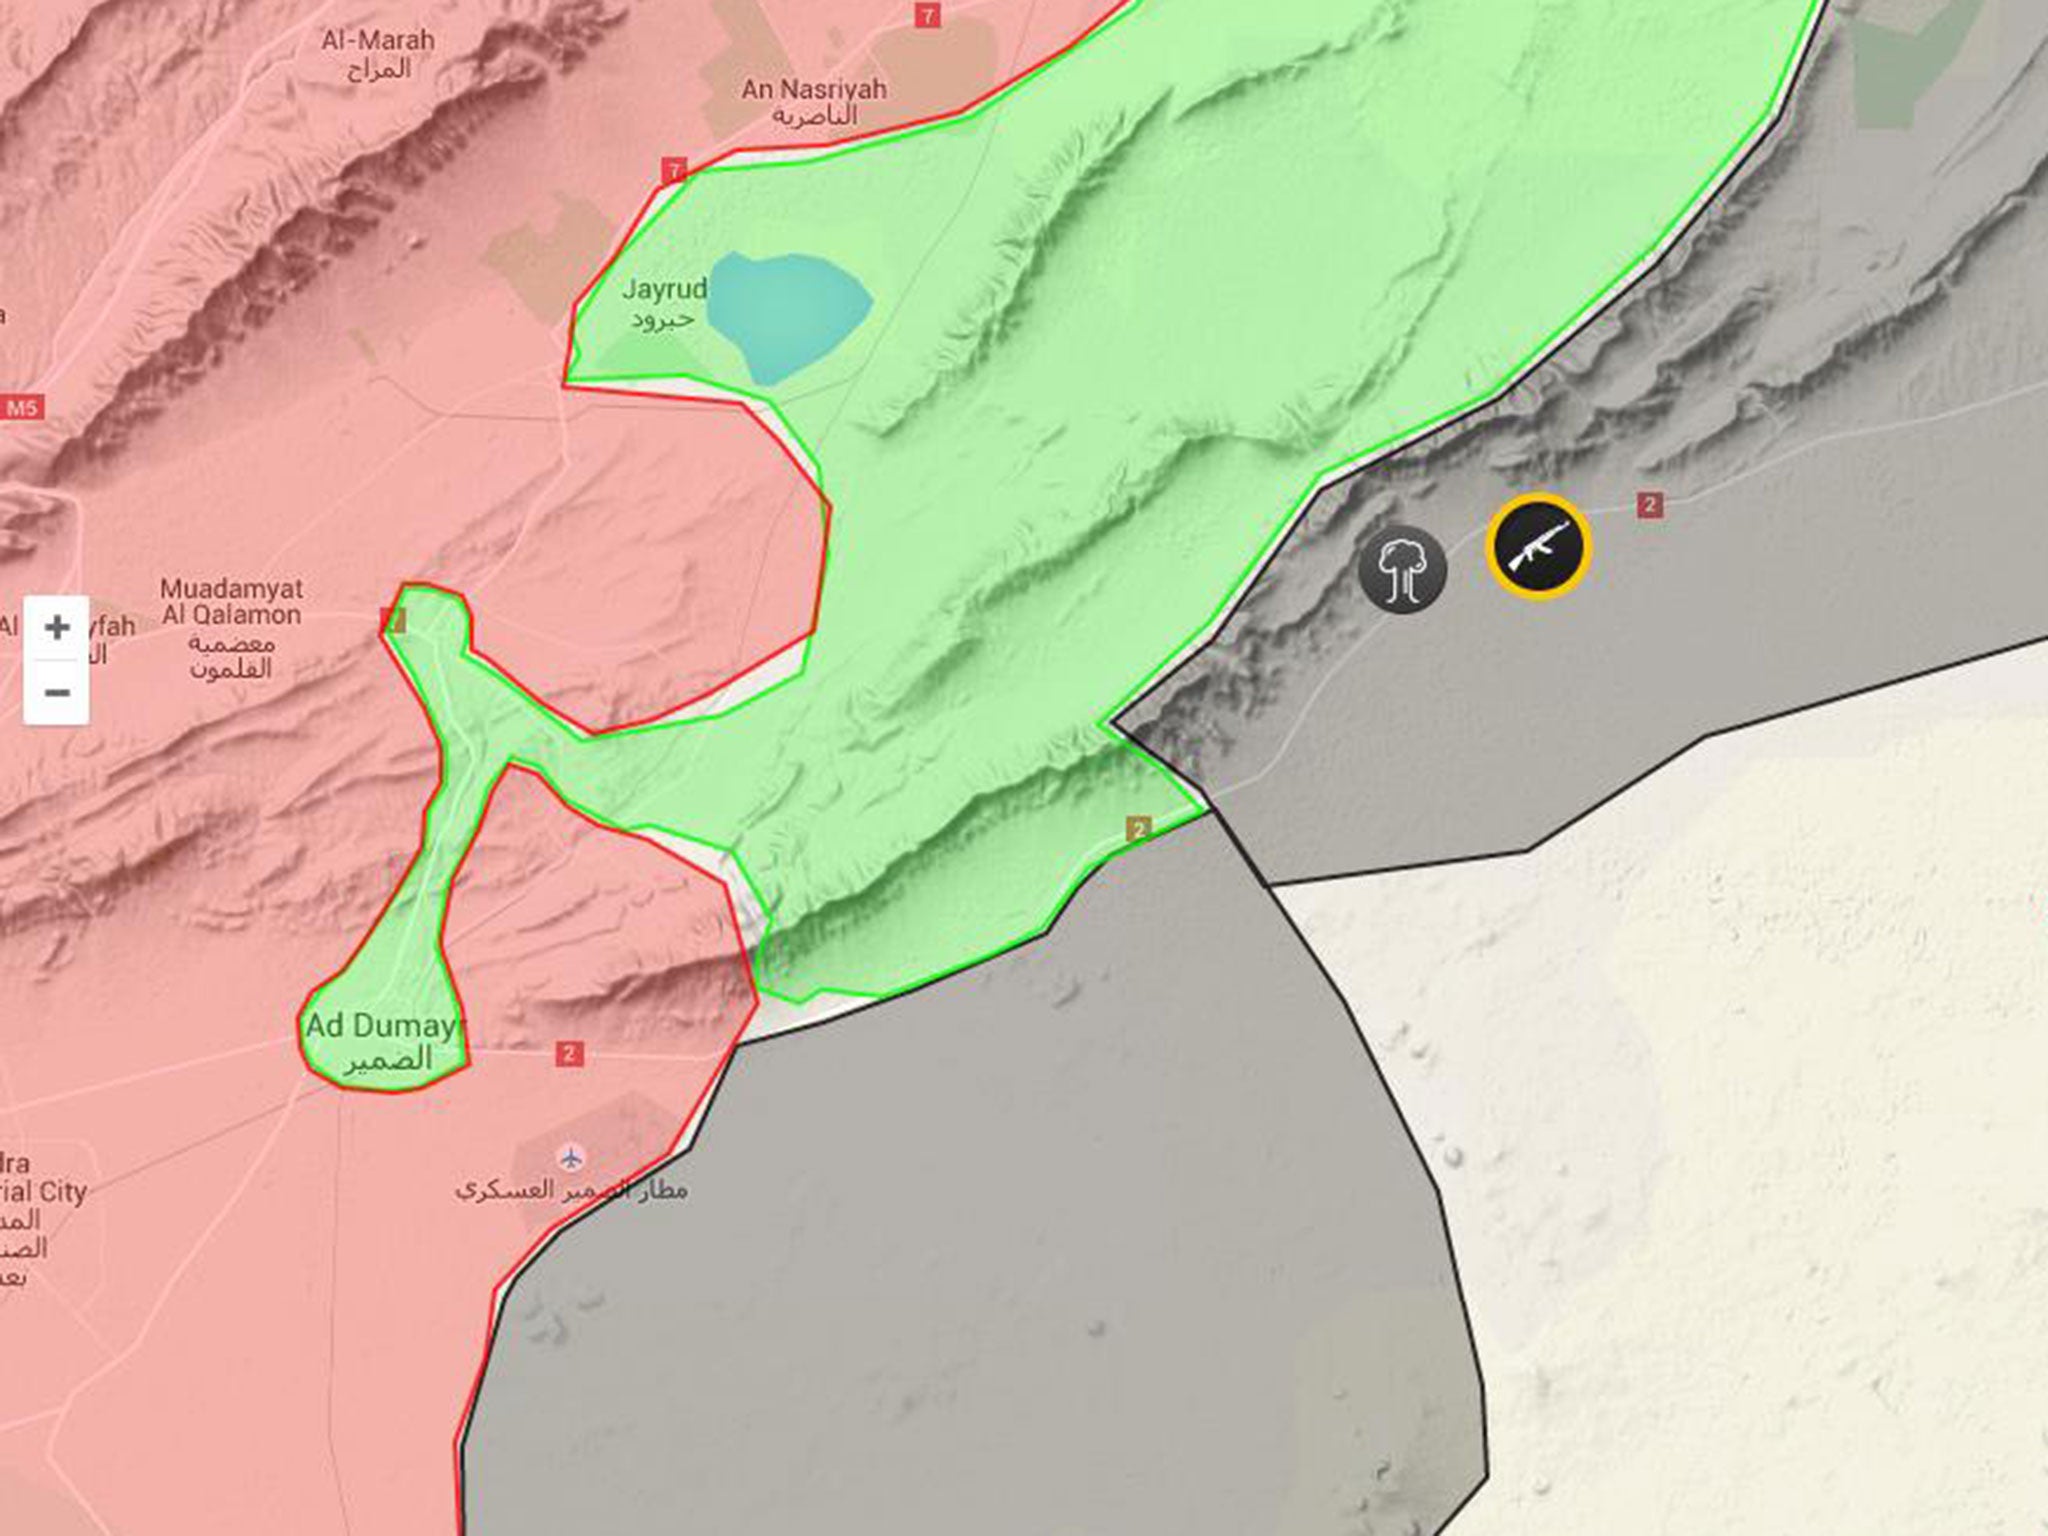 The black symbols show the location of fighting at the factory, which lies on the frontline between Syrian government forces (red), rebels (green) and Isis (black)